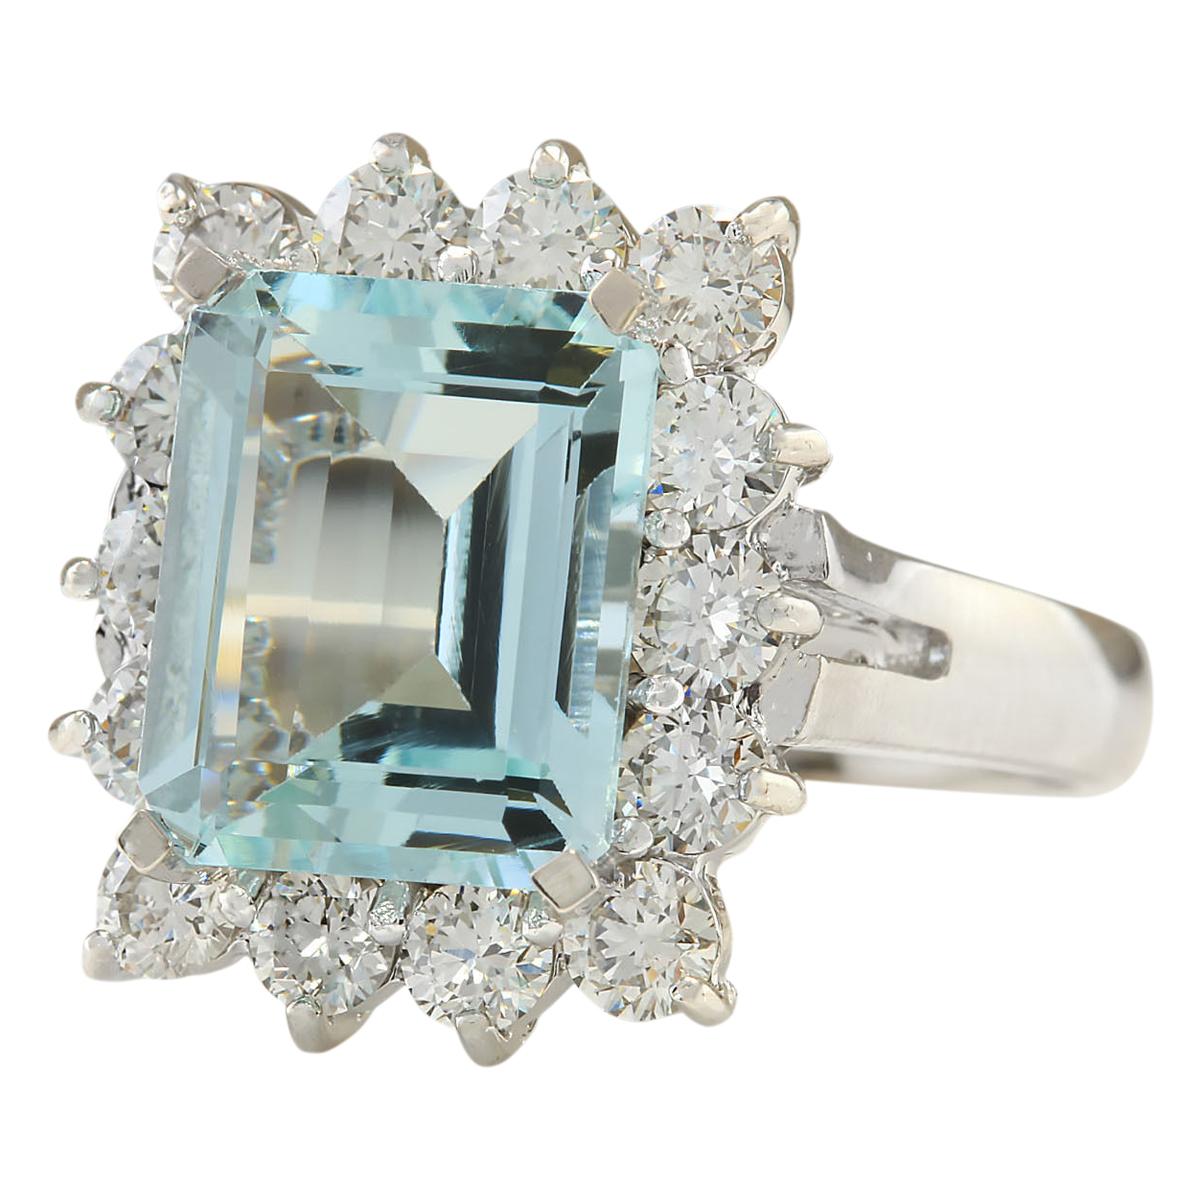 5.06 Carat Natural Aquamarine 14 Karat White Gold Diamond Ring
Stamped: 14K White Gold
Total Ring Weight: 6.4 Grams
Total Natural Aquamarine Weight is 3.76 Carat (Measures: 11.00x9.00 mm)
Color: Blue
Total Natural Diamond Weight is 1.30 Carat
Color: